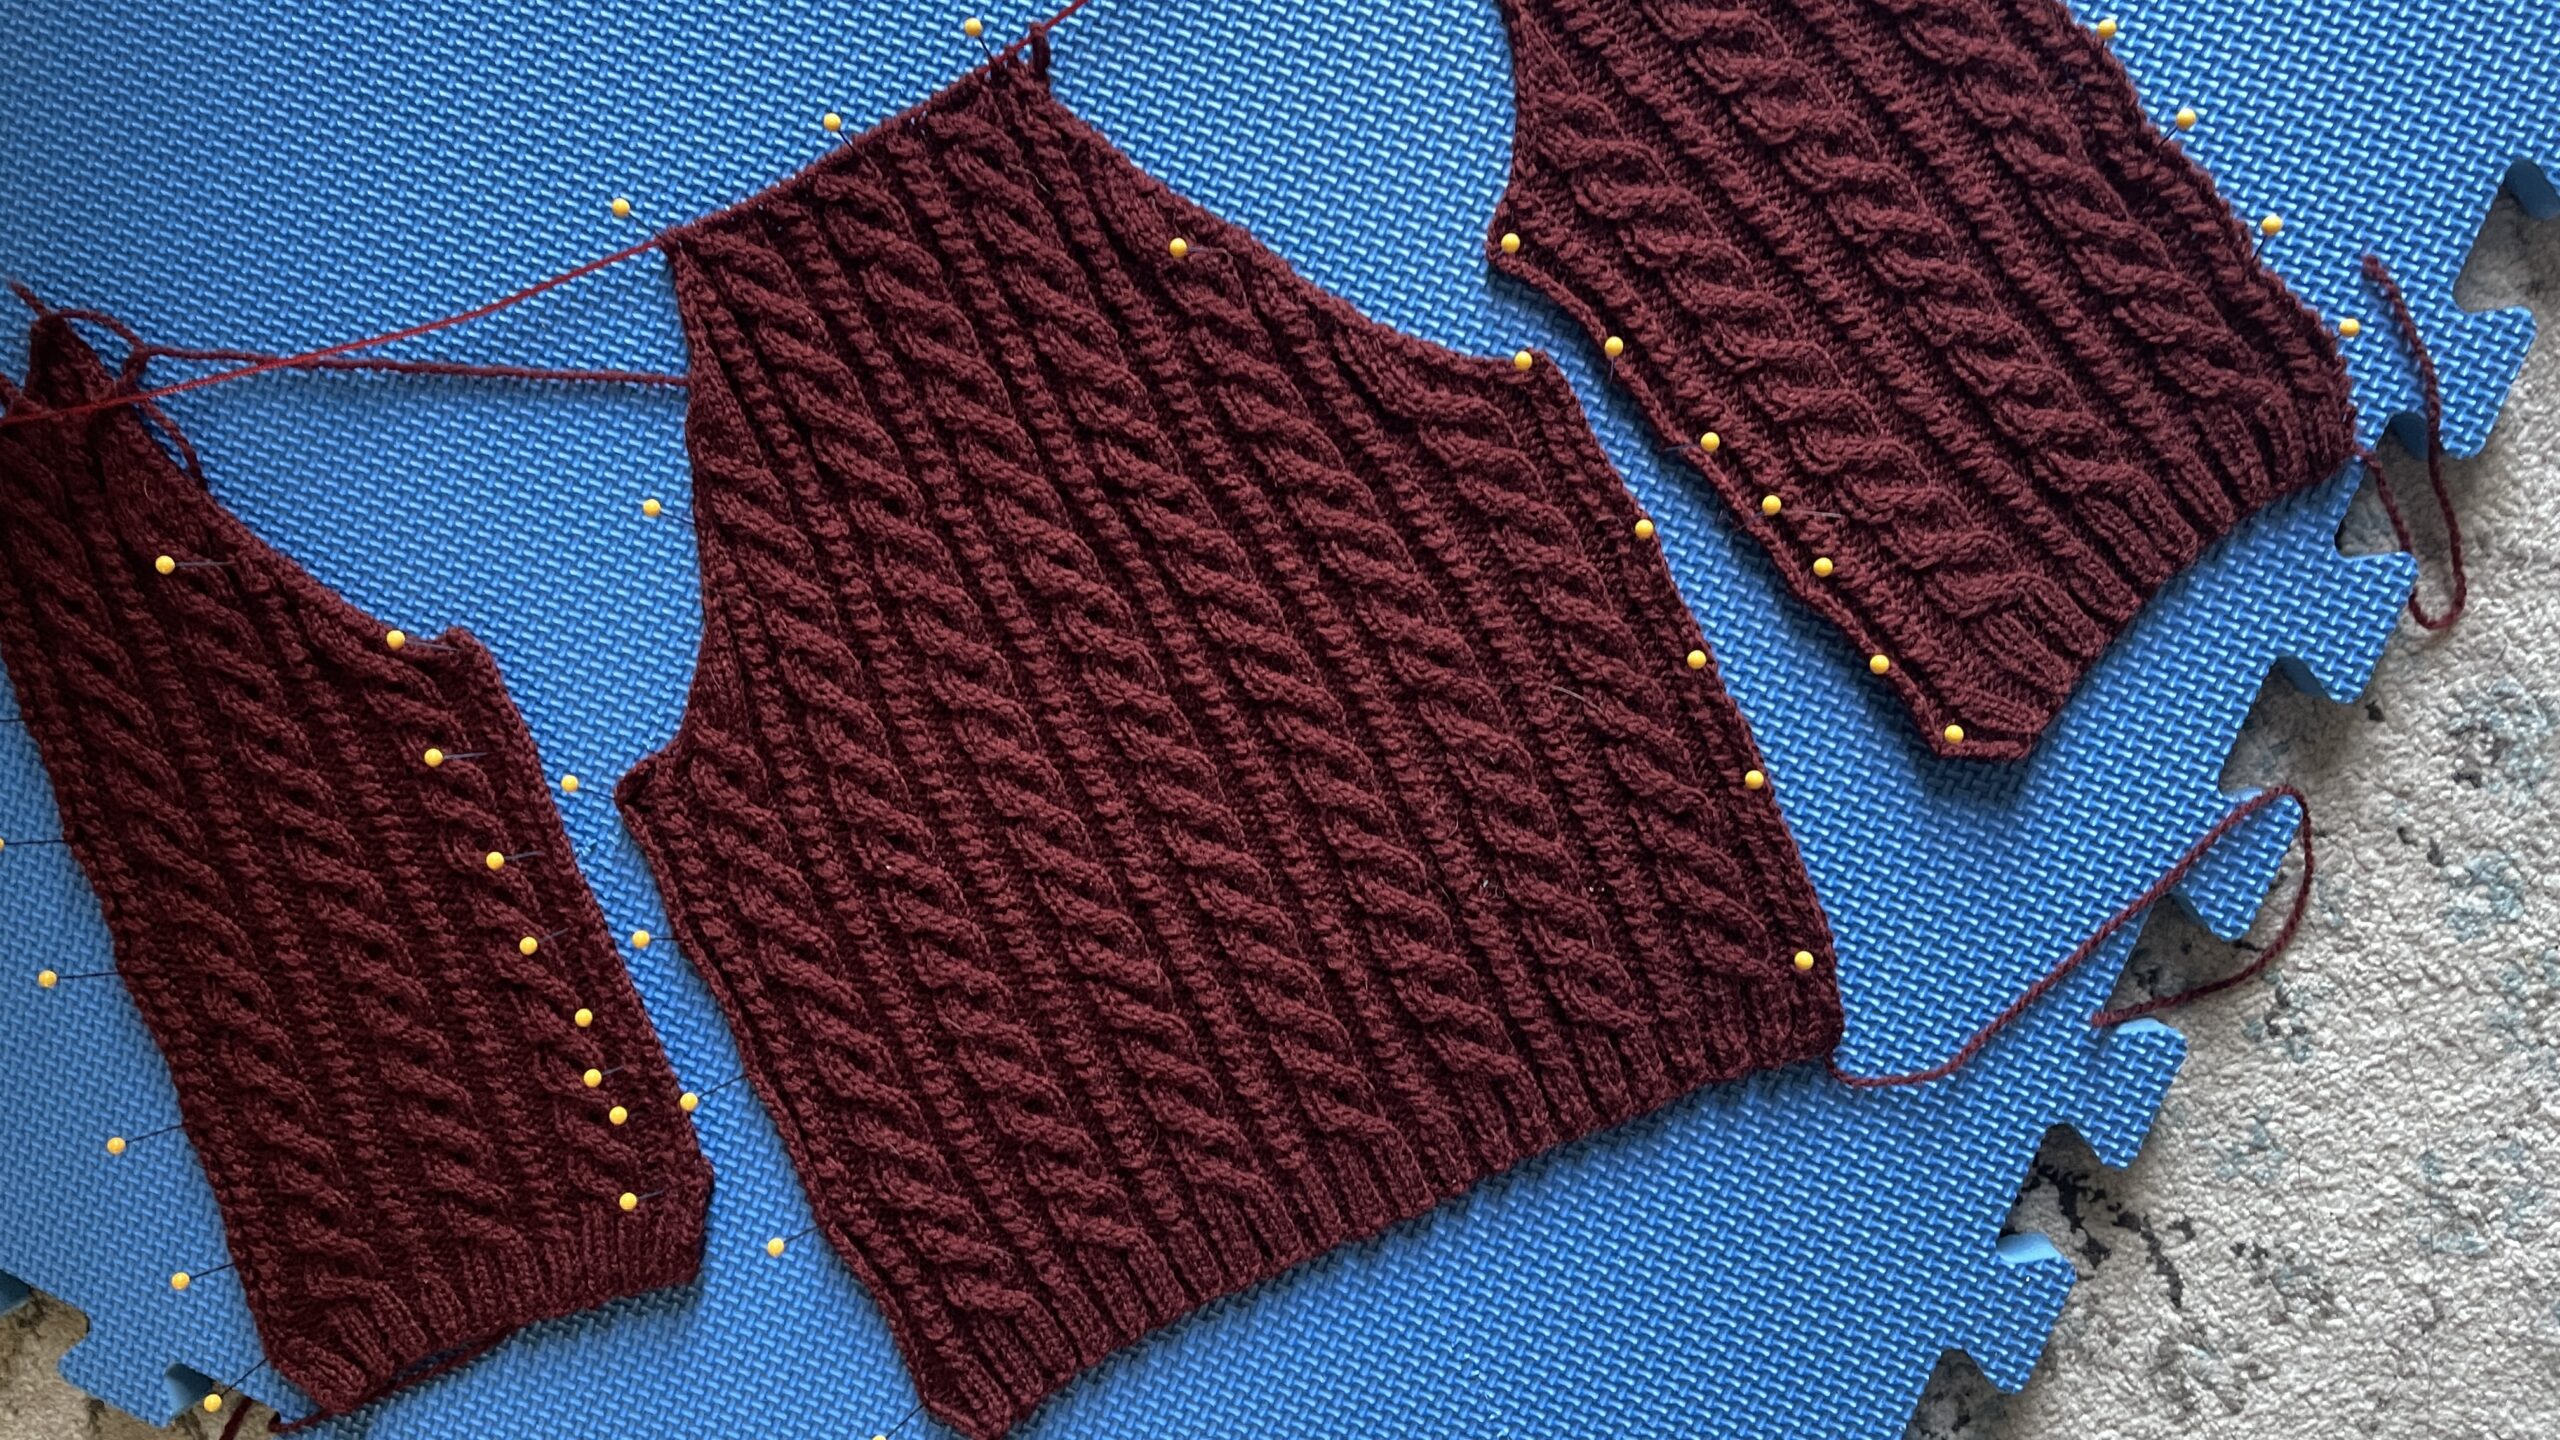 Photo of a small cabled cardigan in progress, with the back and both fronts blocking on the mat.